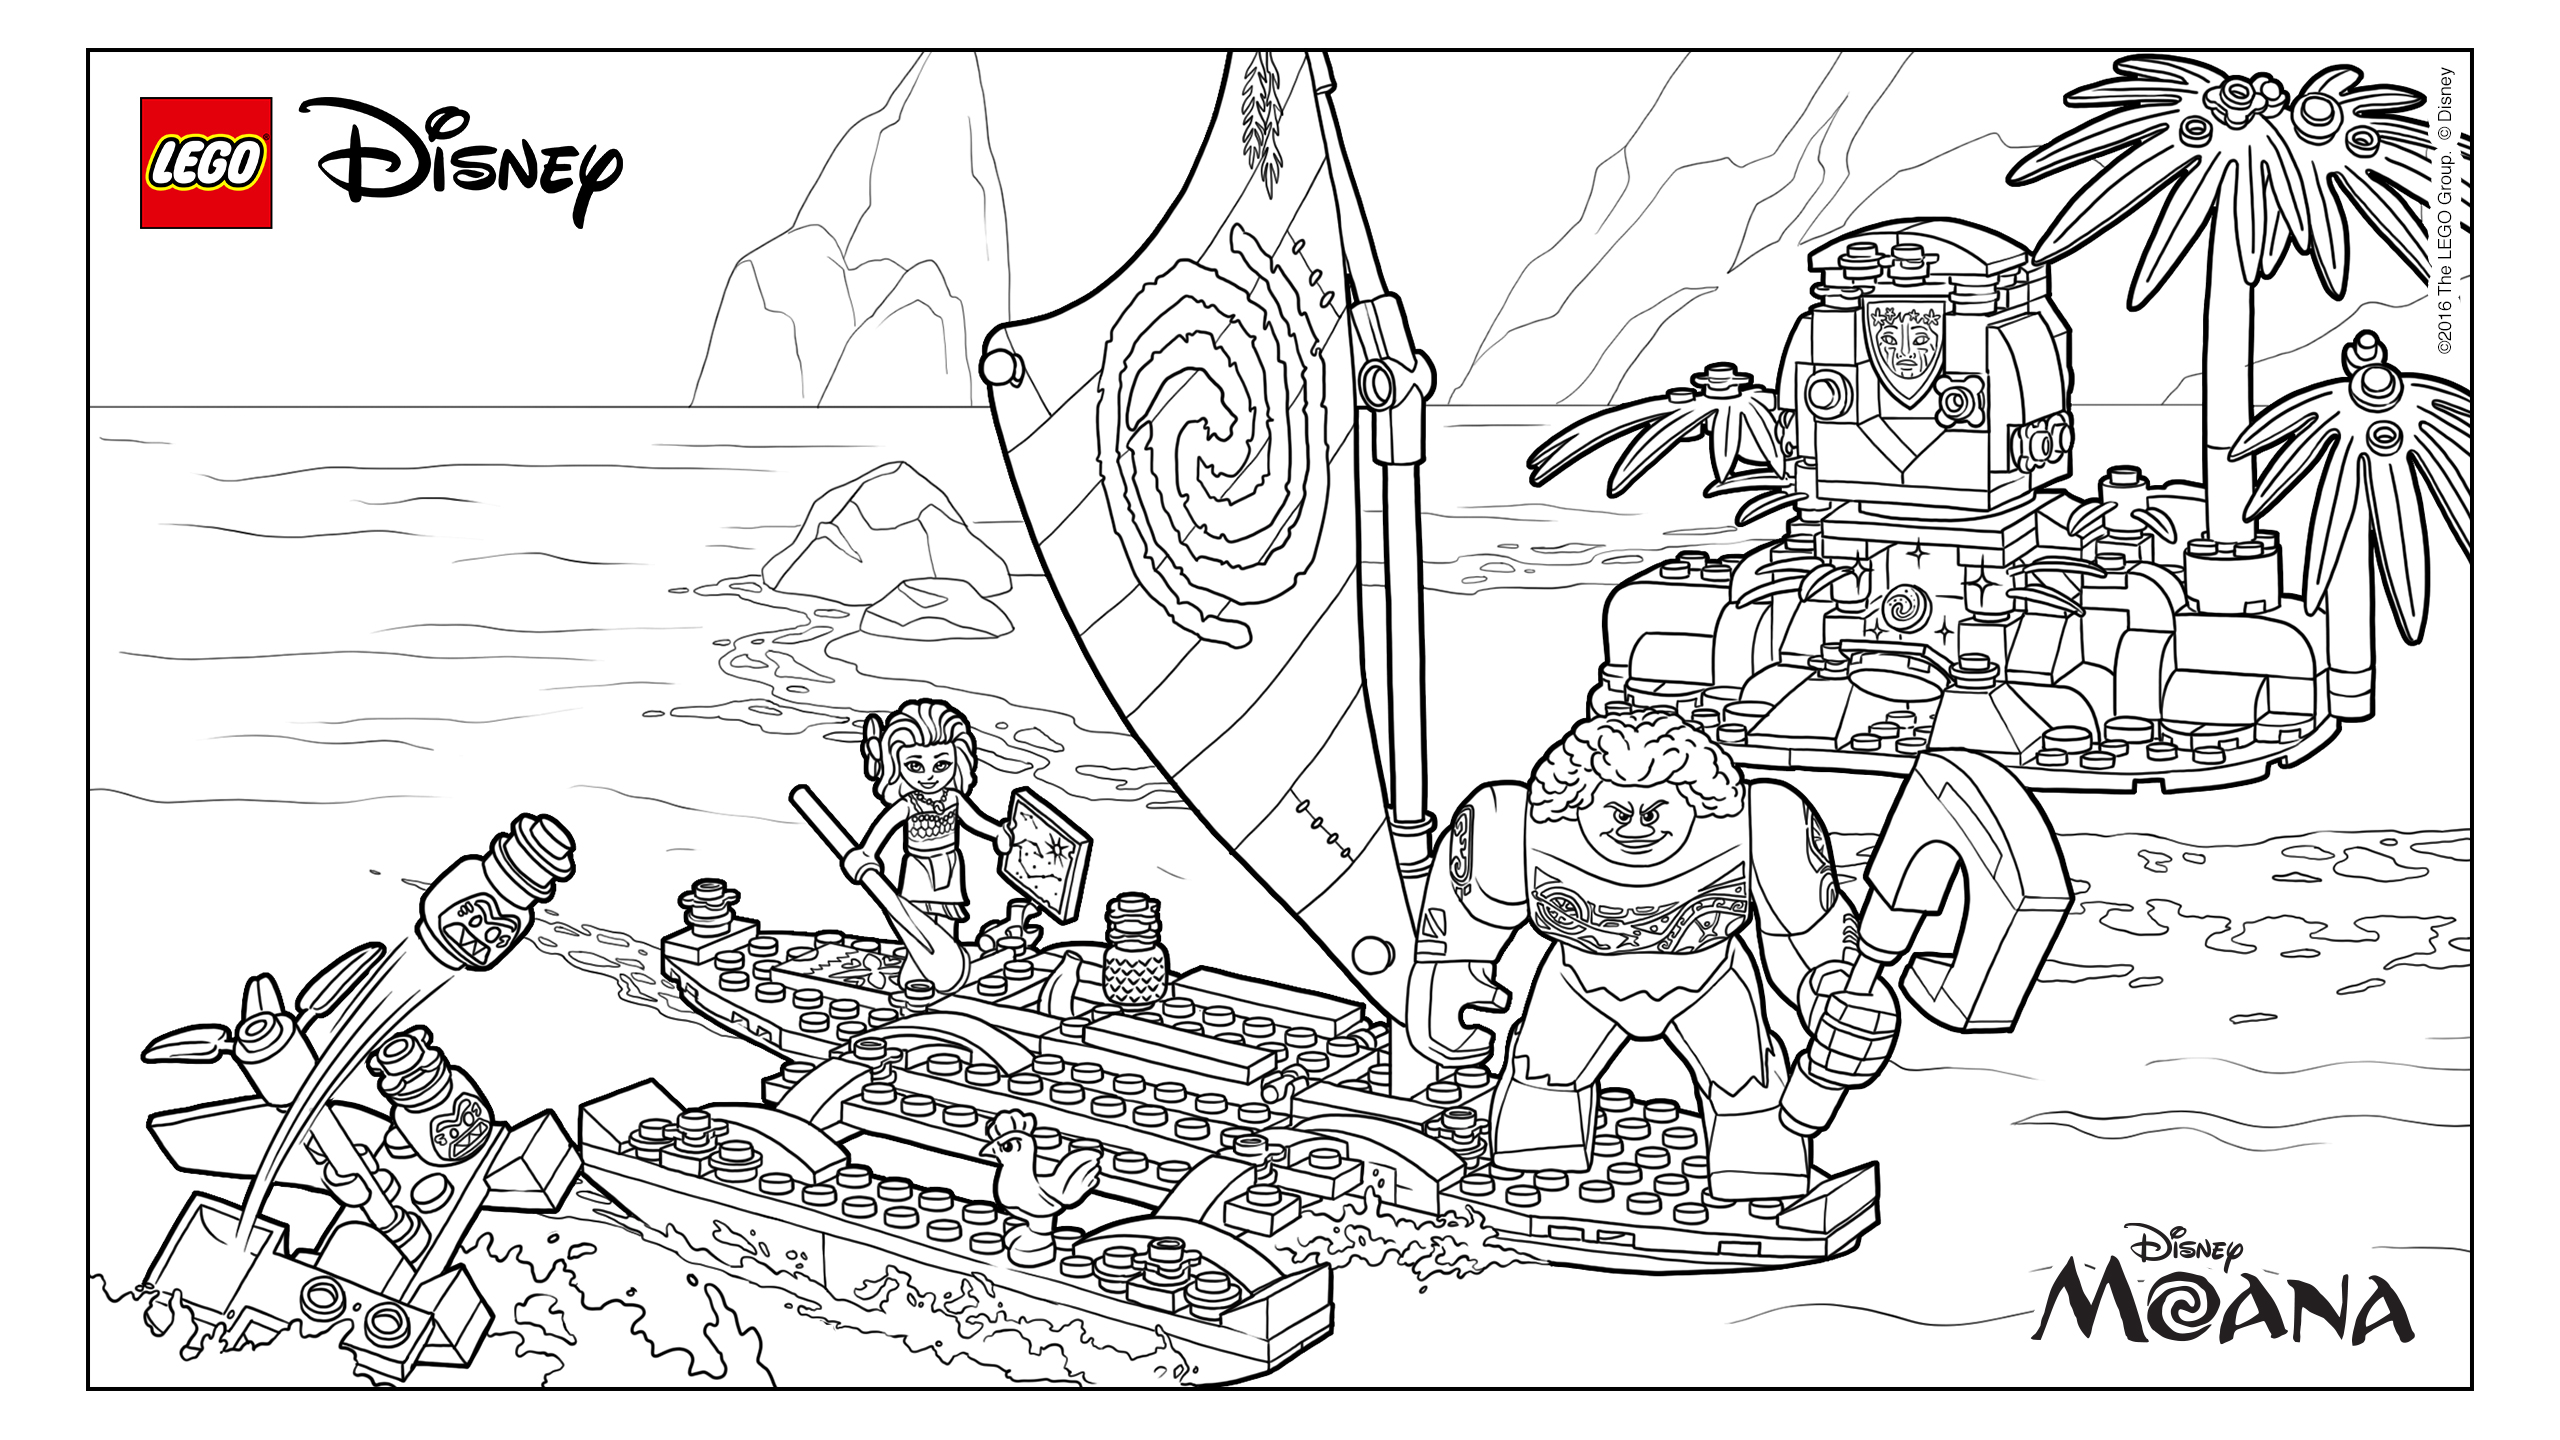 Vaiana (Disney / Pixar) picture to print and color - Moana Kids Coloring  Pages